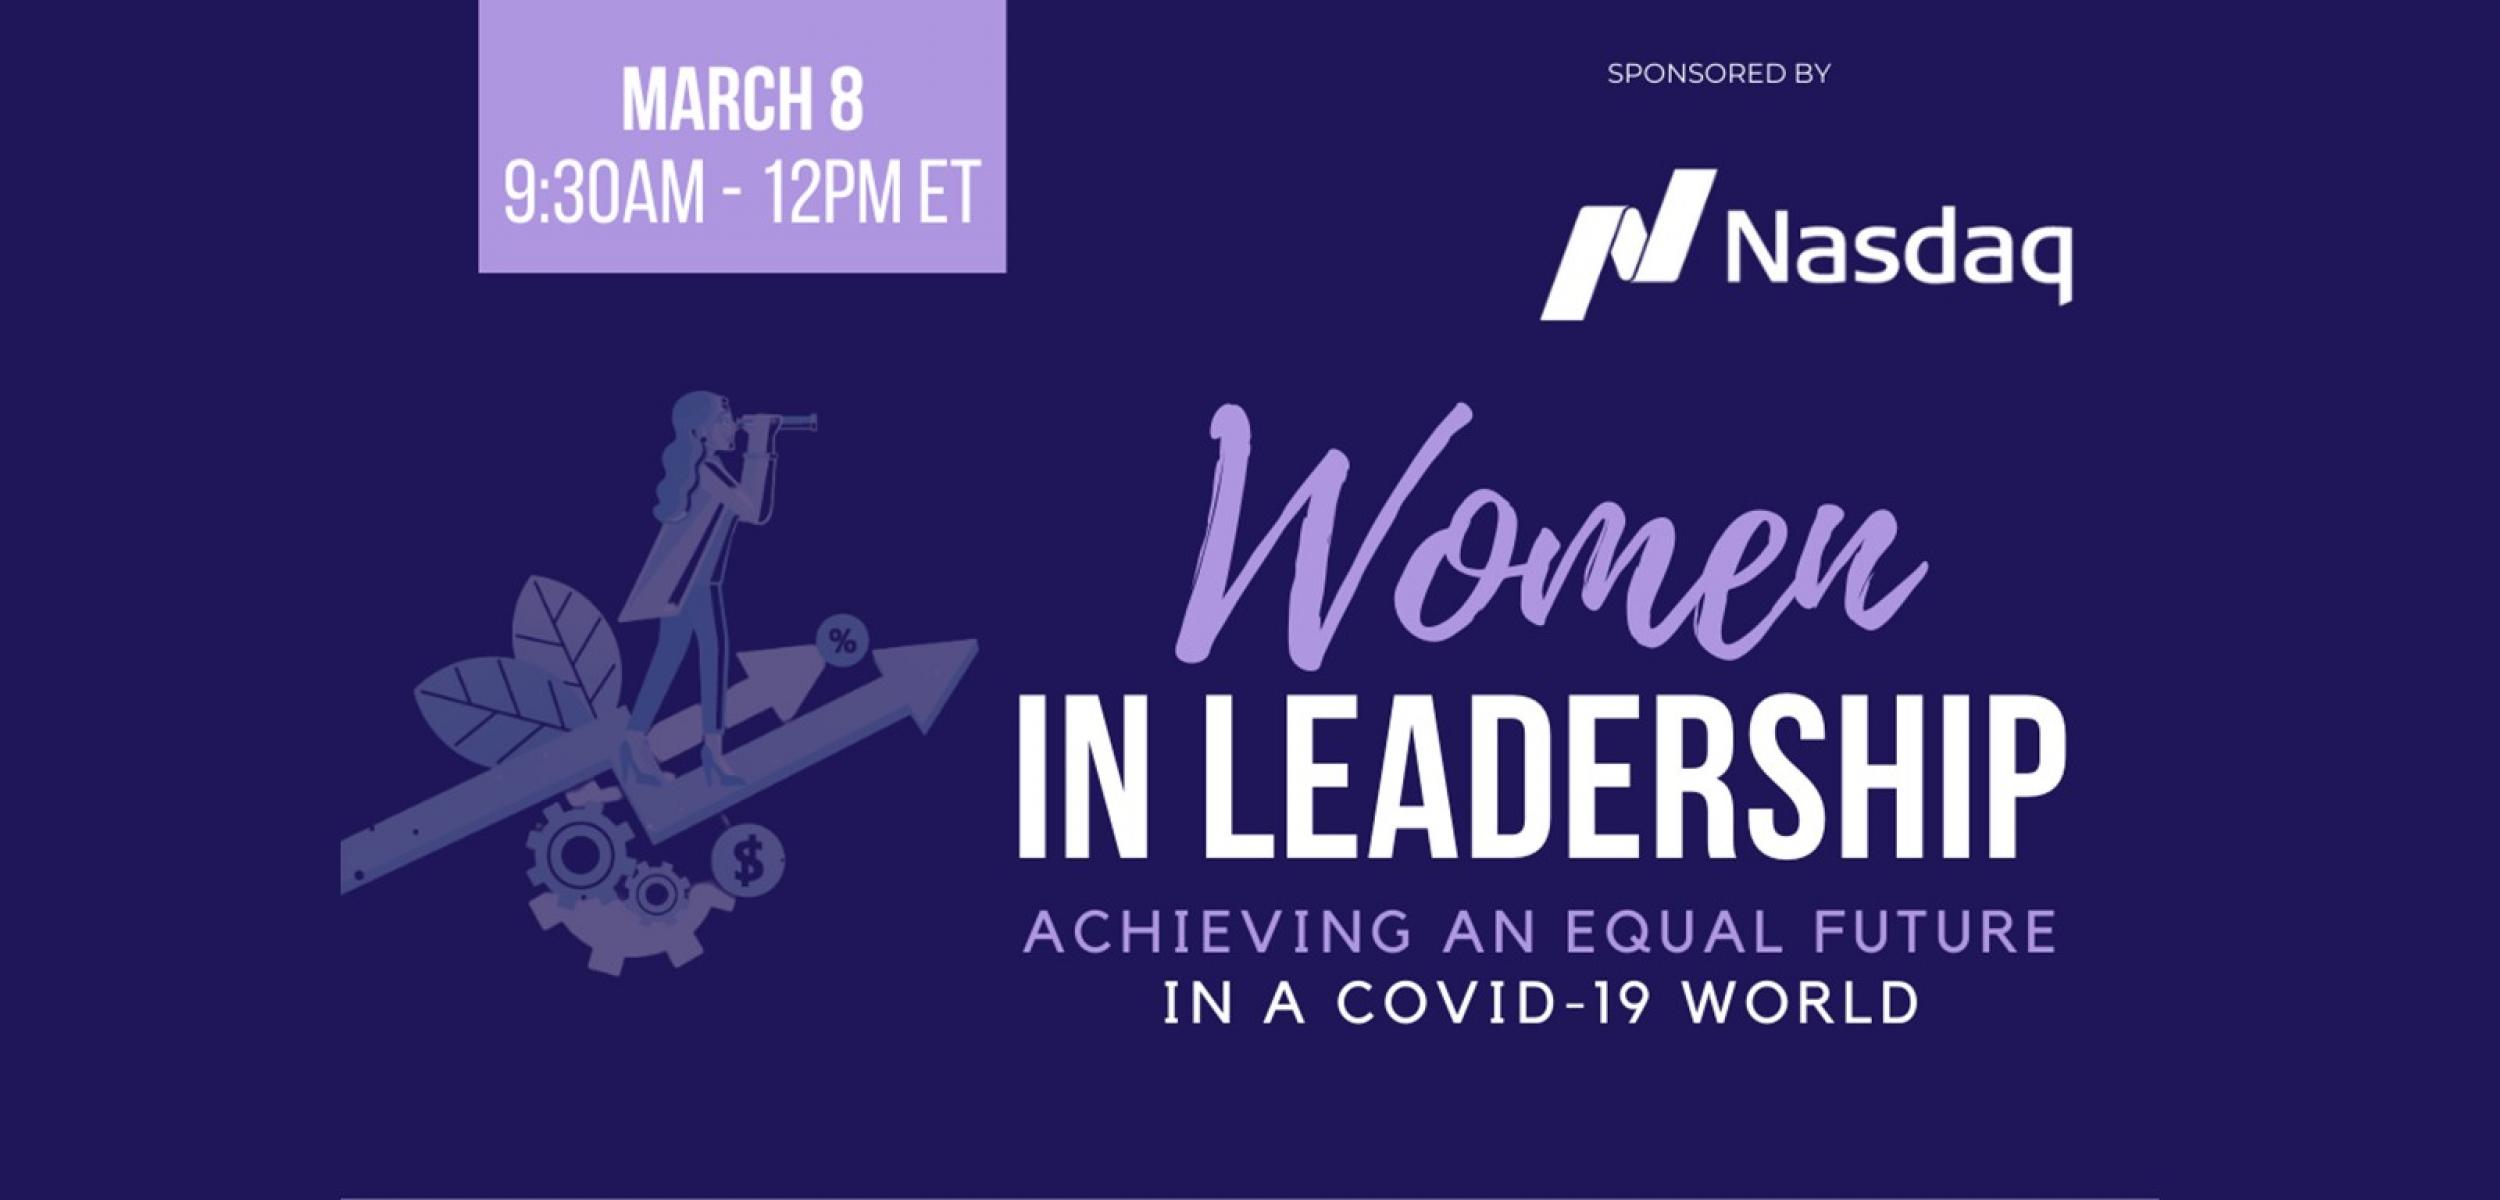 Women in Leadership Achieving an Equal Future in a COVID-19 World 